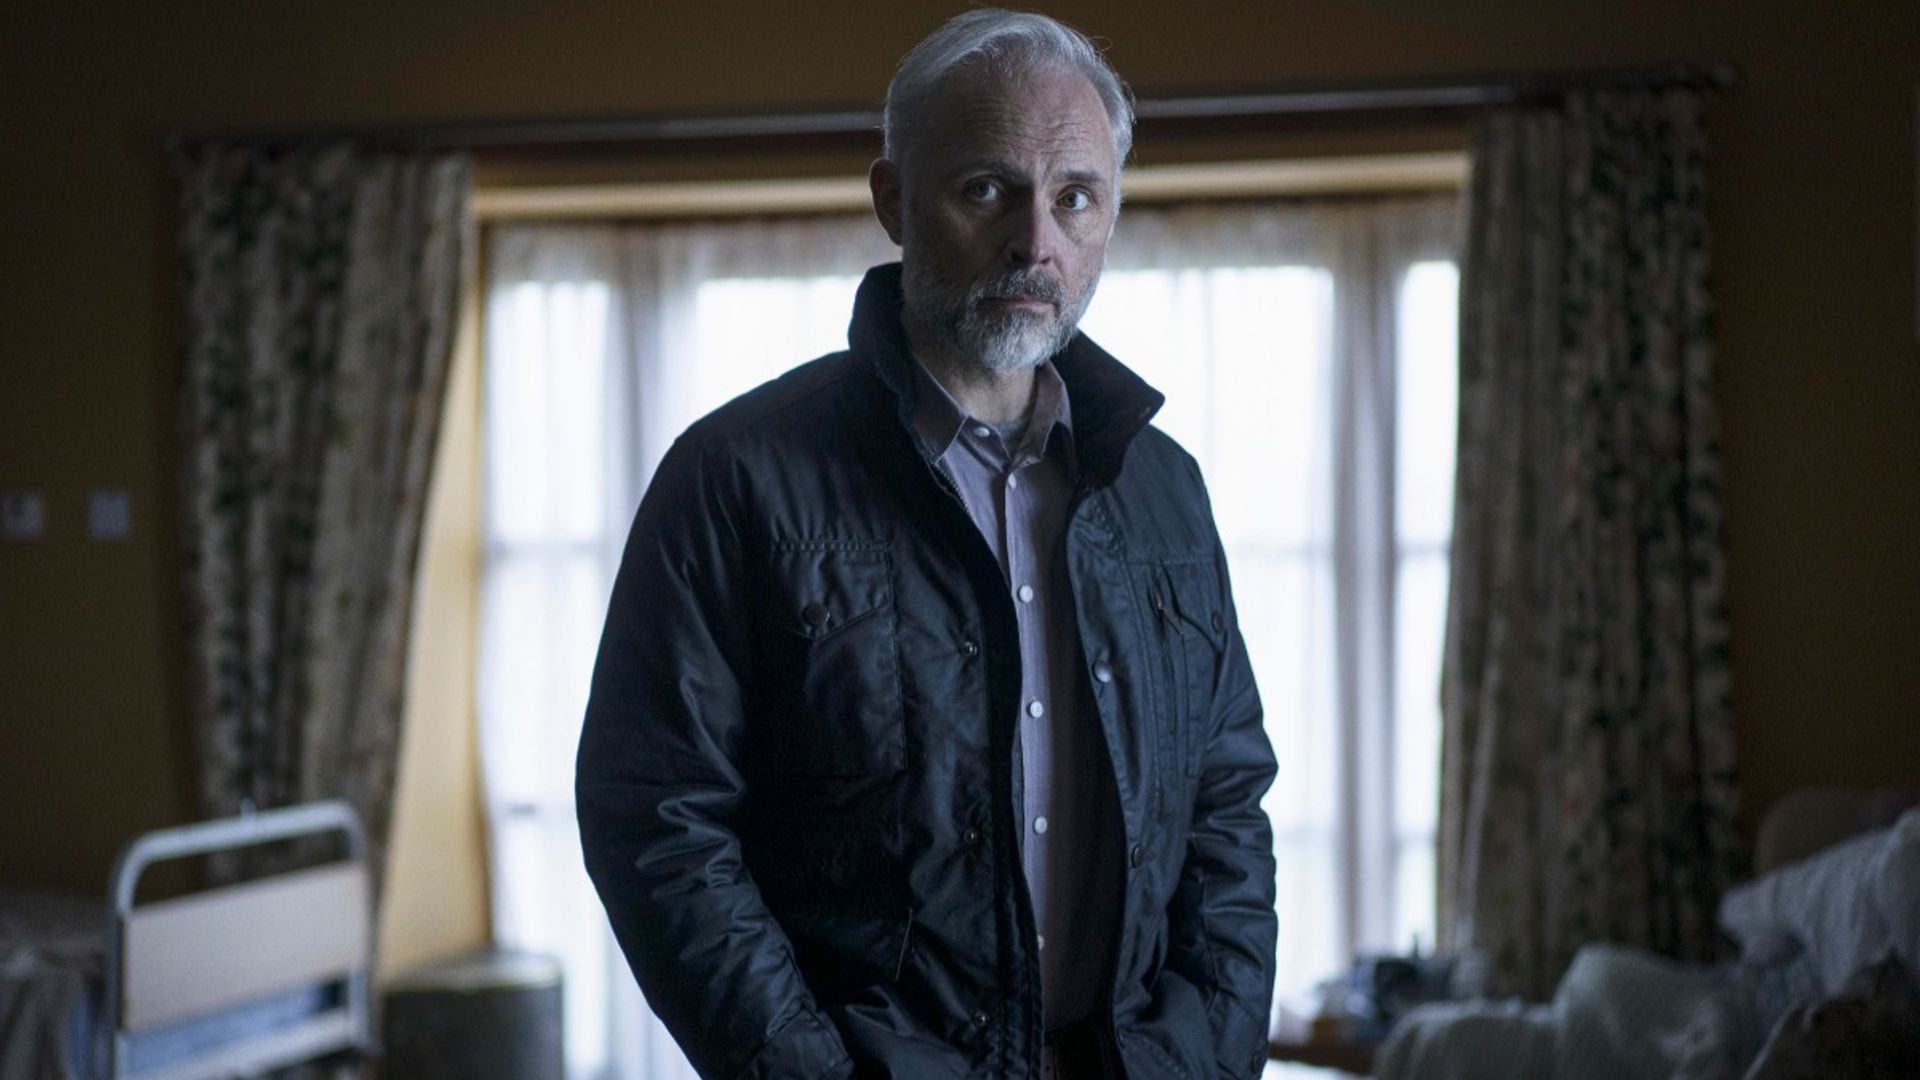 Shetland's Mark Bonnar reveals he shares similarities with his character 